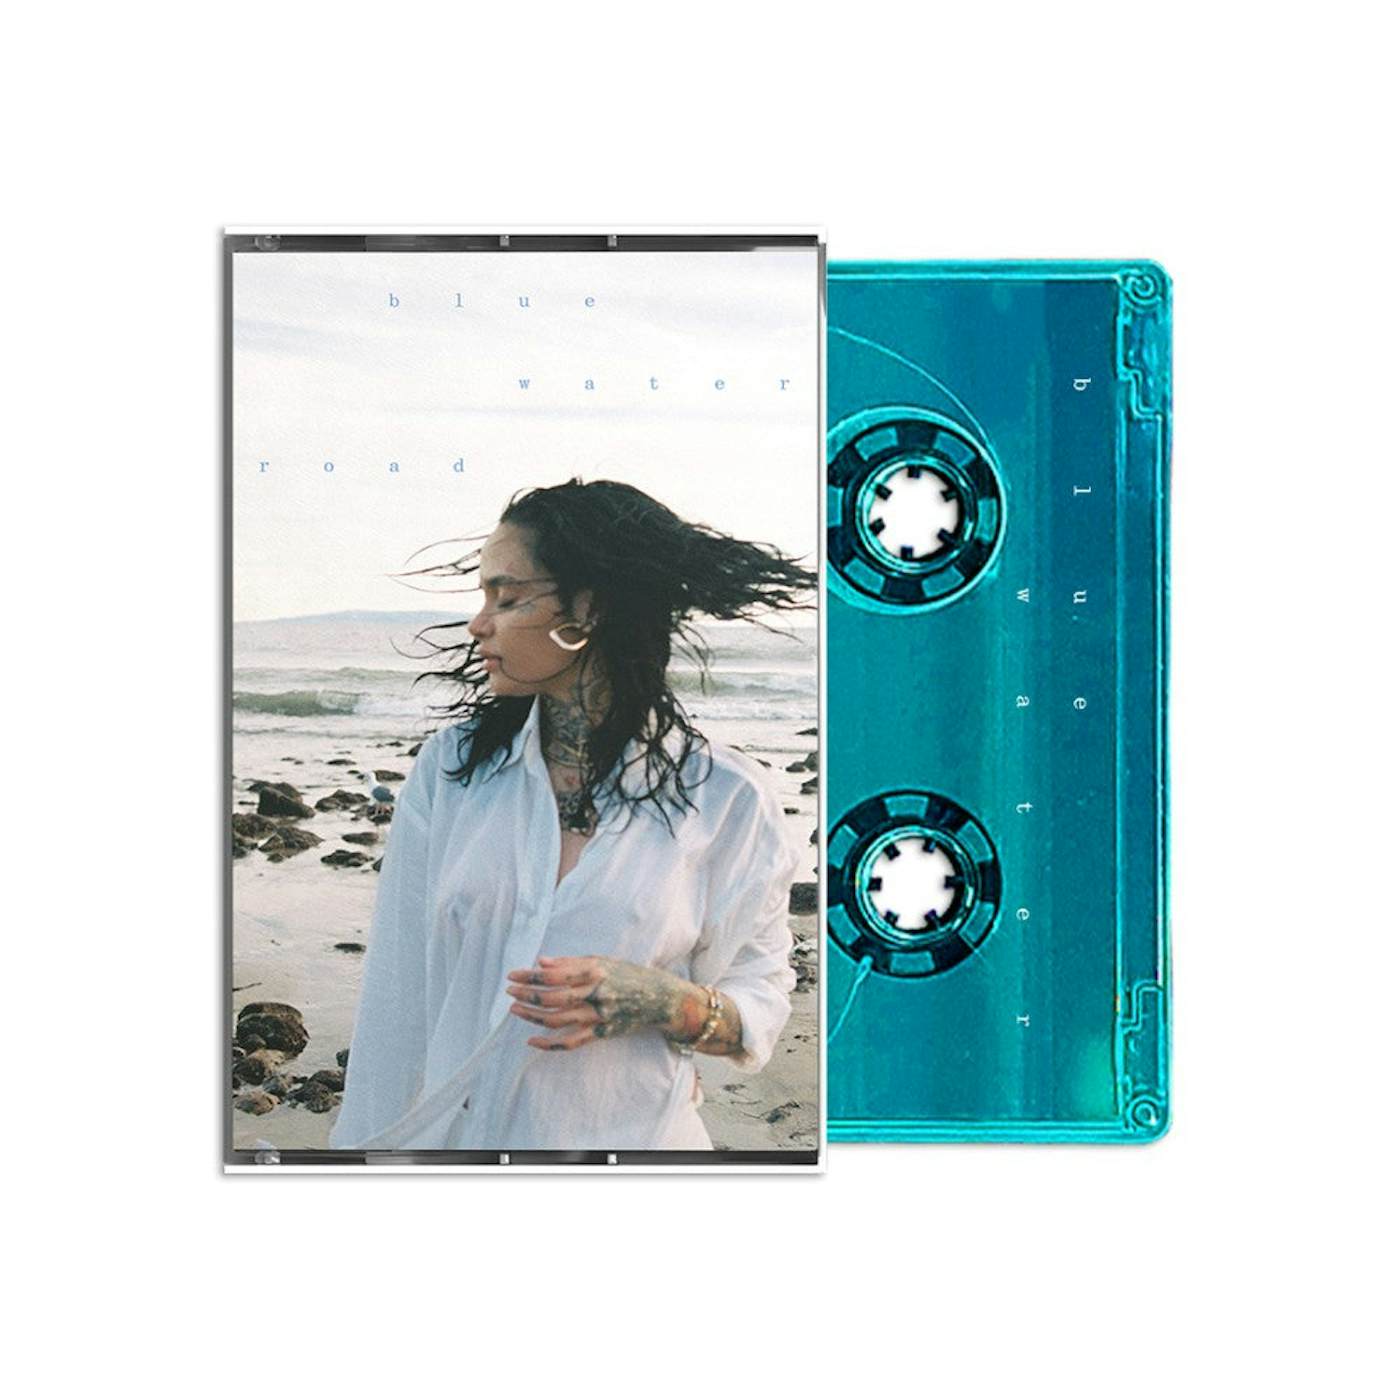 Kehlani blue water road clear turquoise cassette